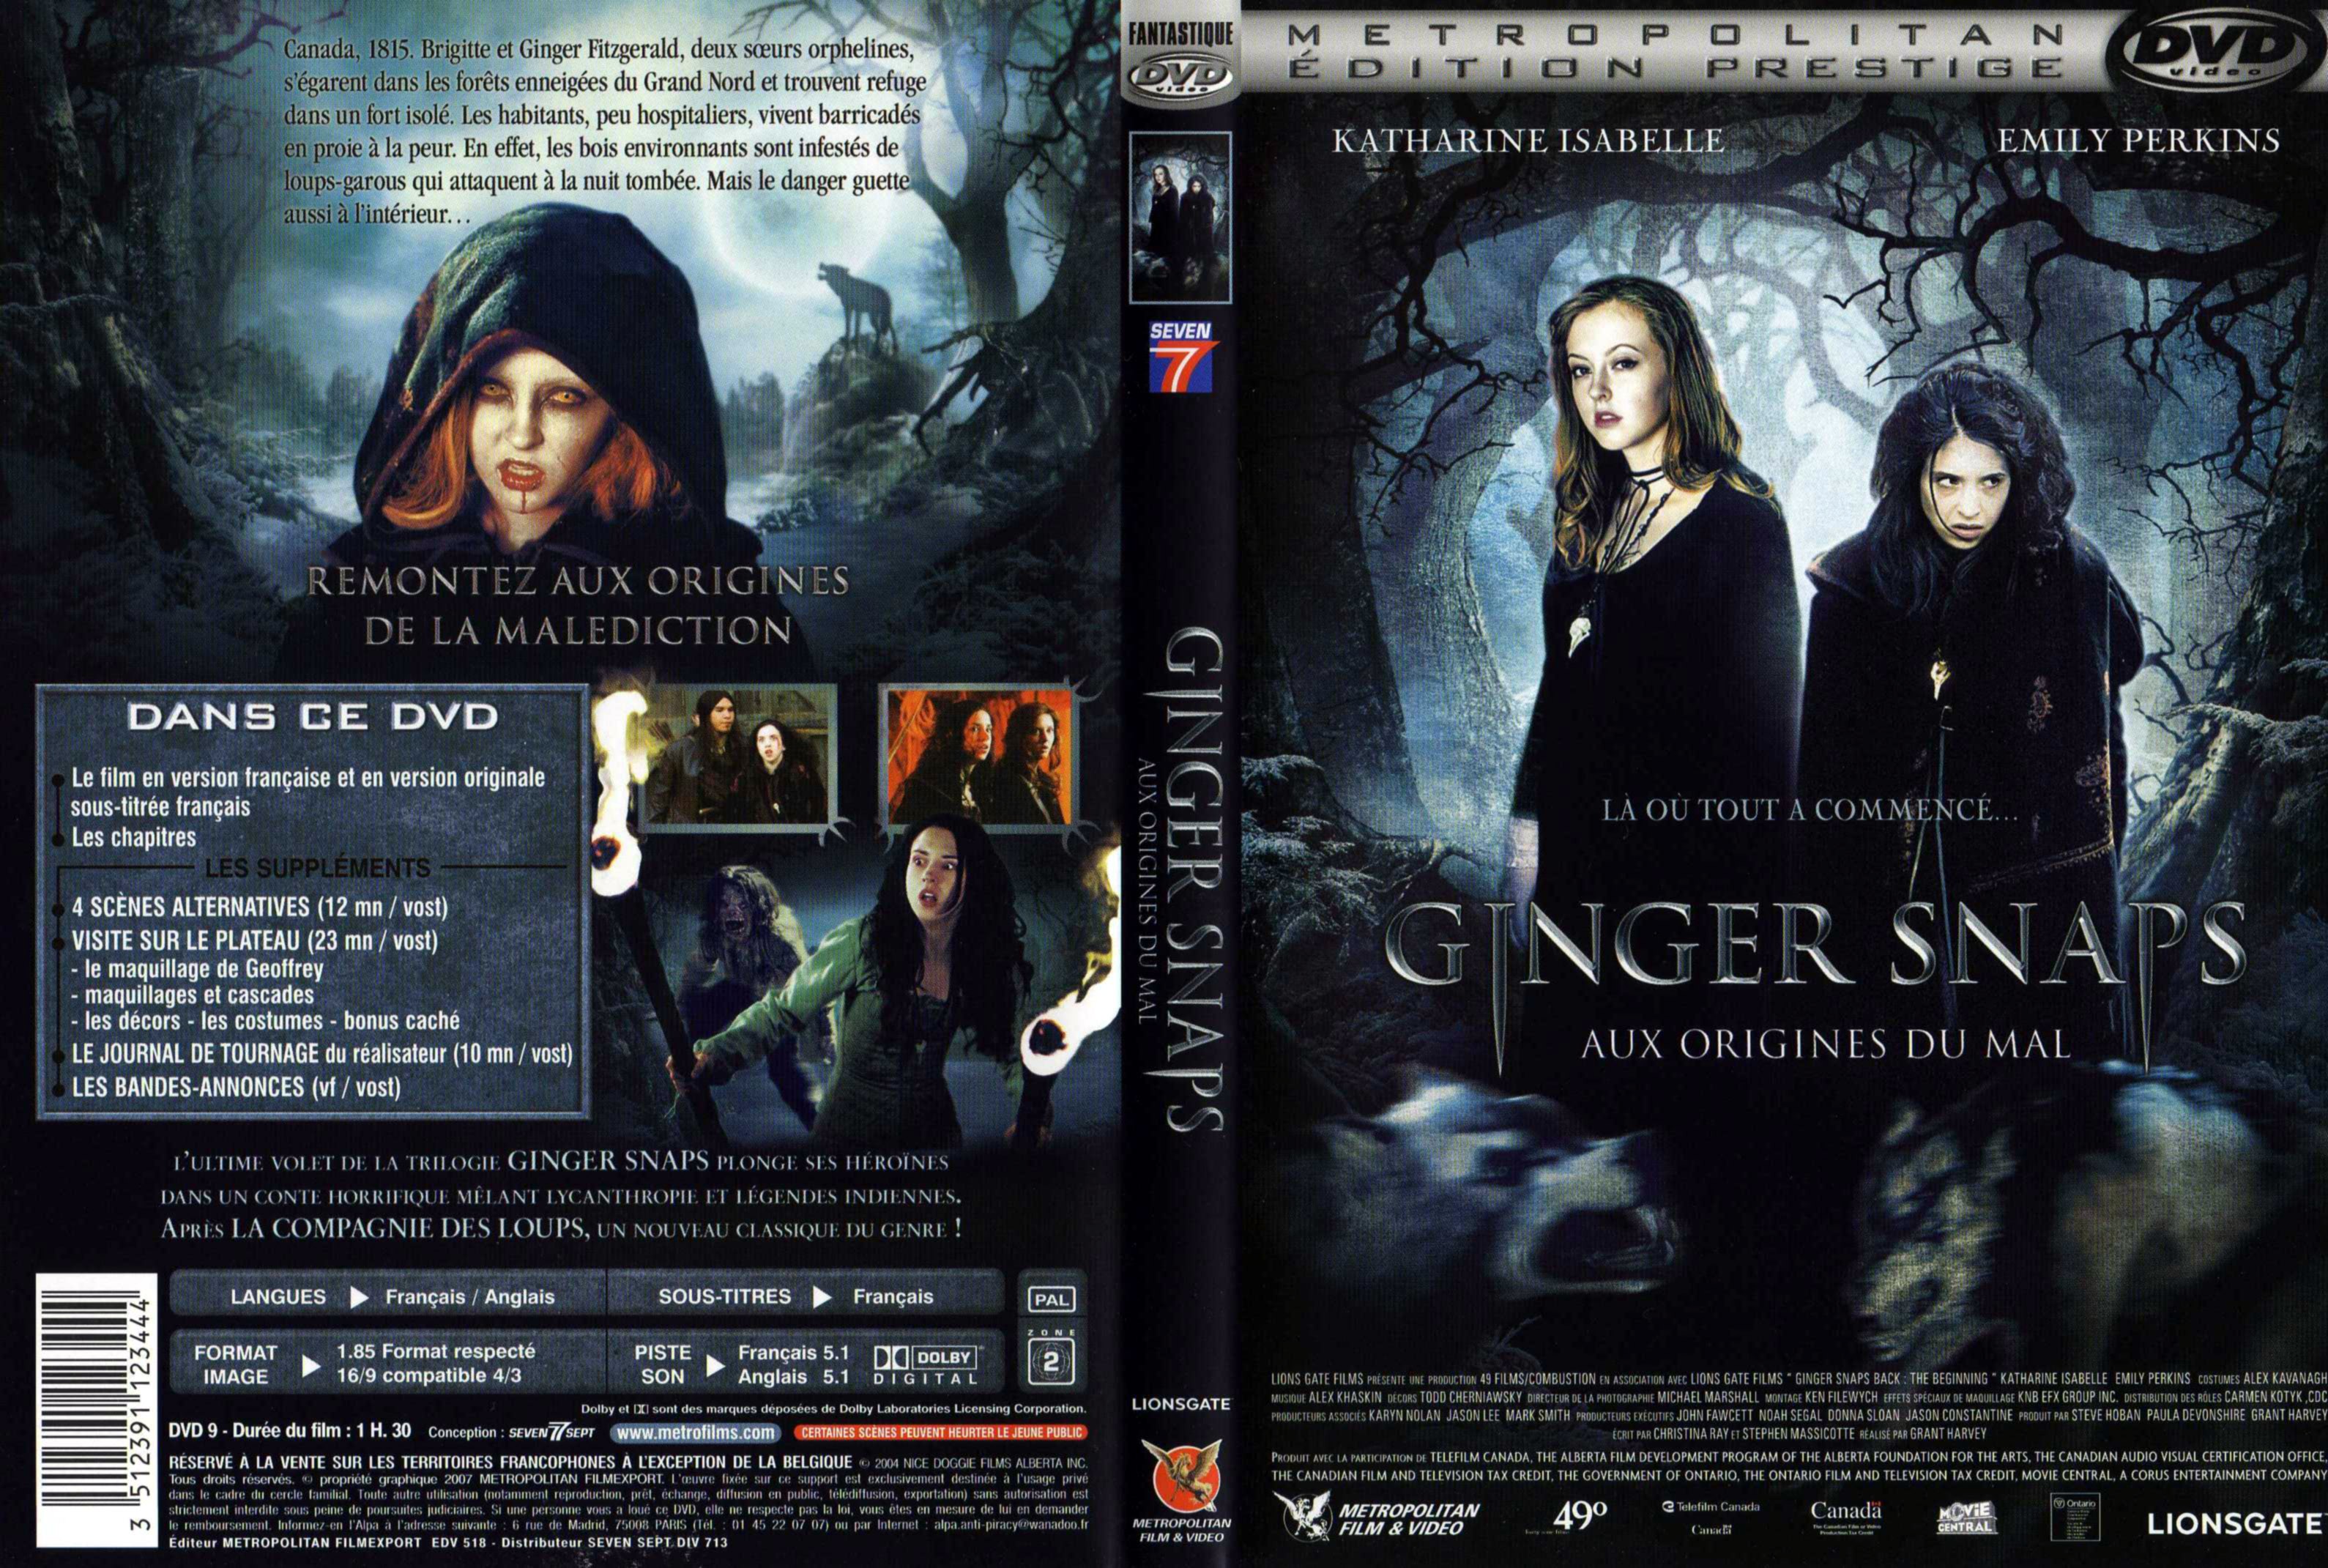 Jaquette DVD Ginger snaps